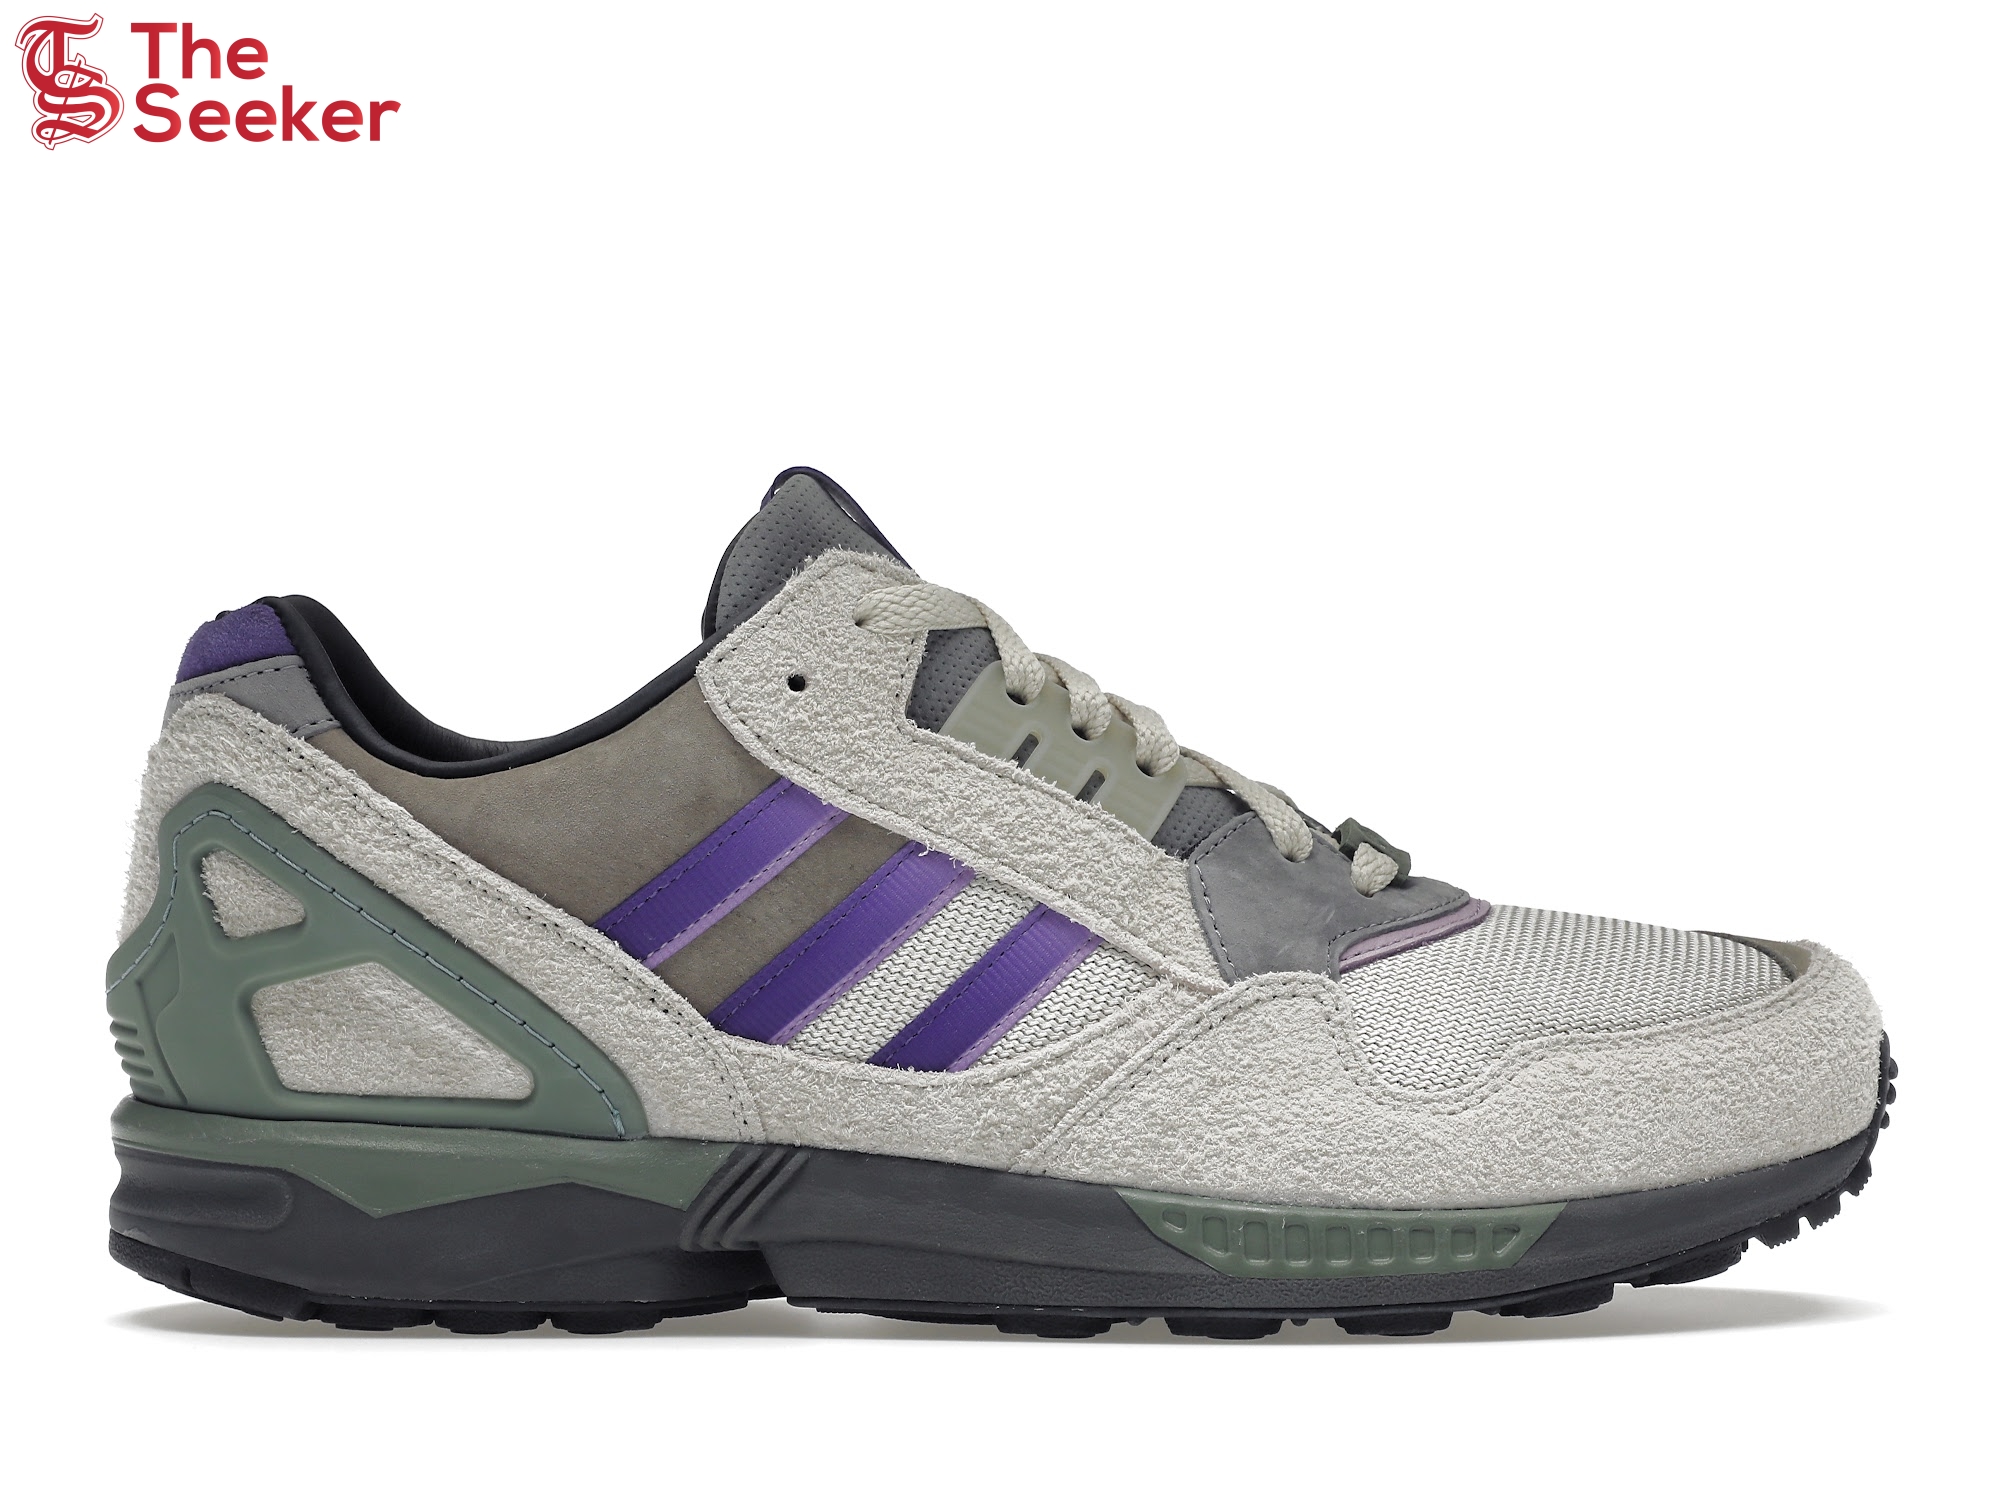 adidas ZX9000 Packer Shoes Meadow Violet